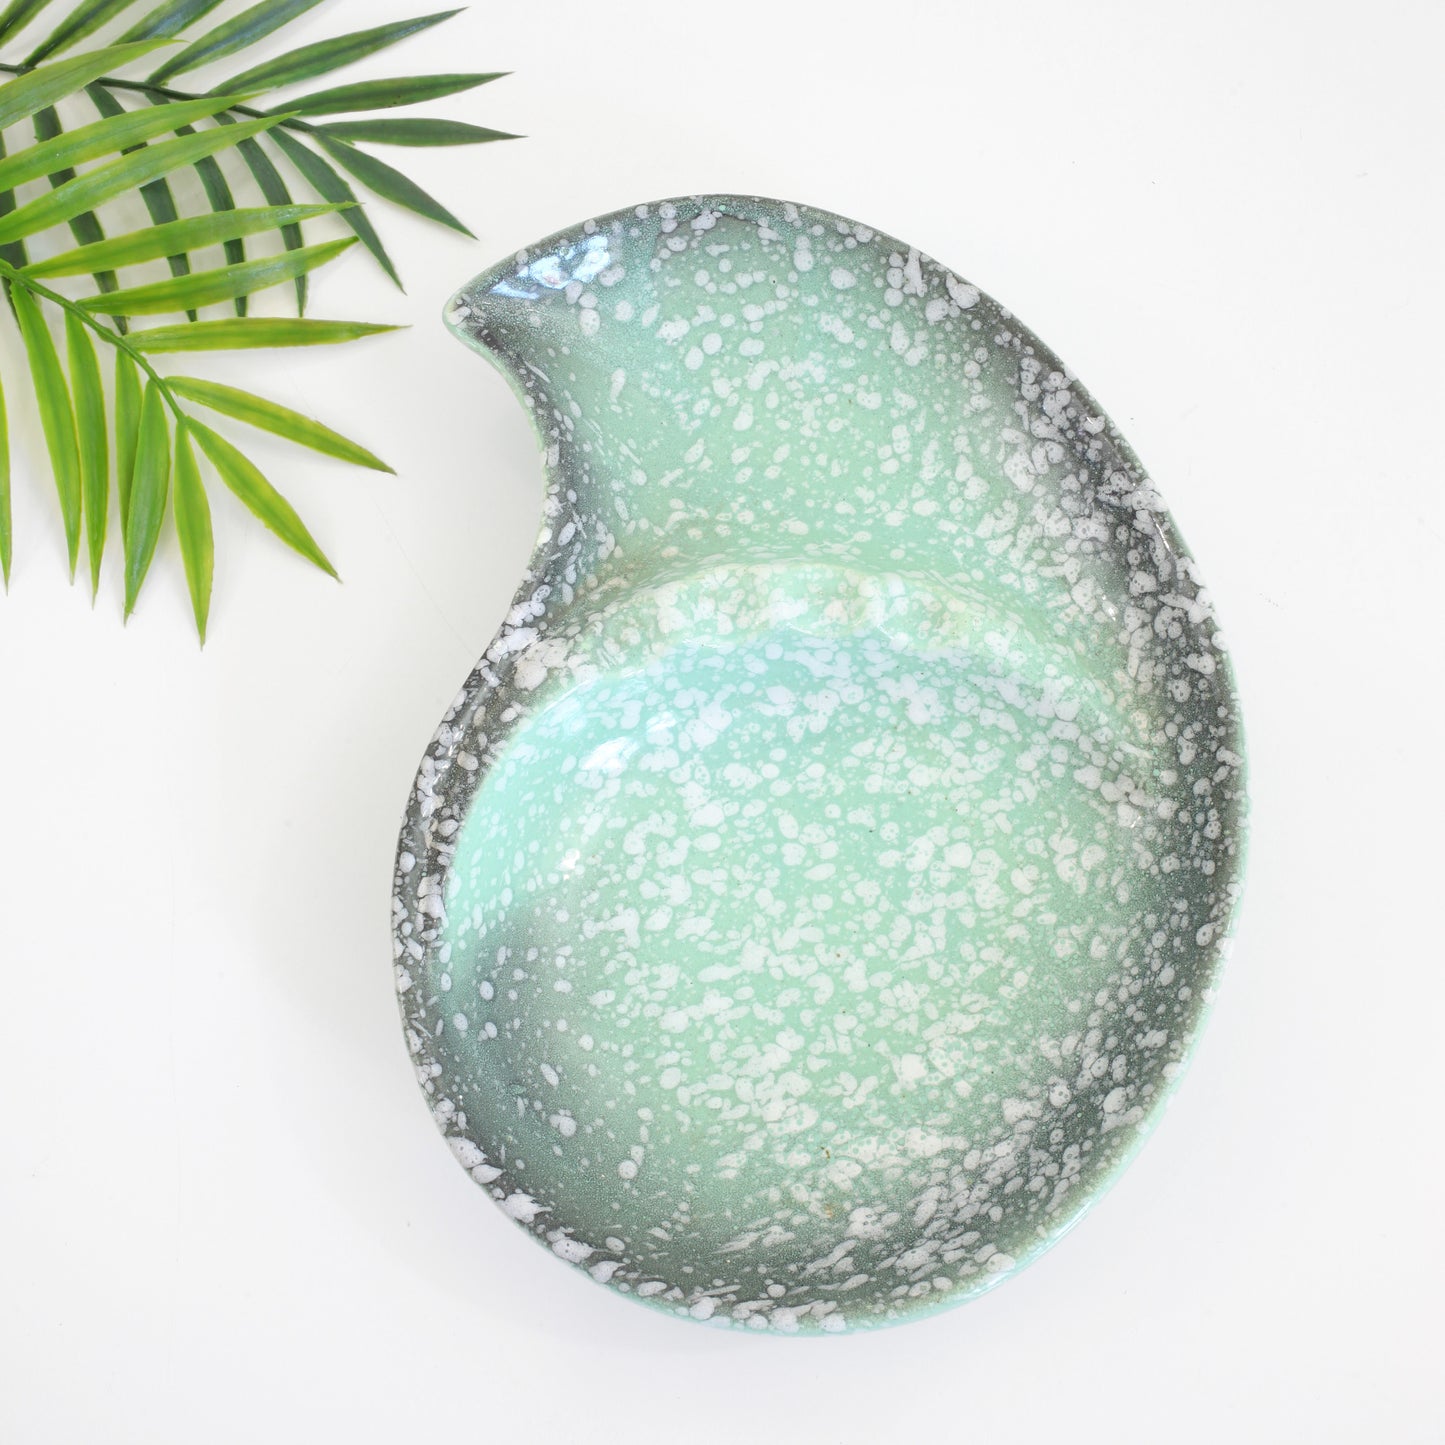 SOLD - Mid Century Modern Mint Green Speckled Ash Tray